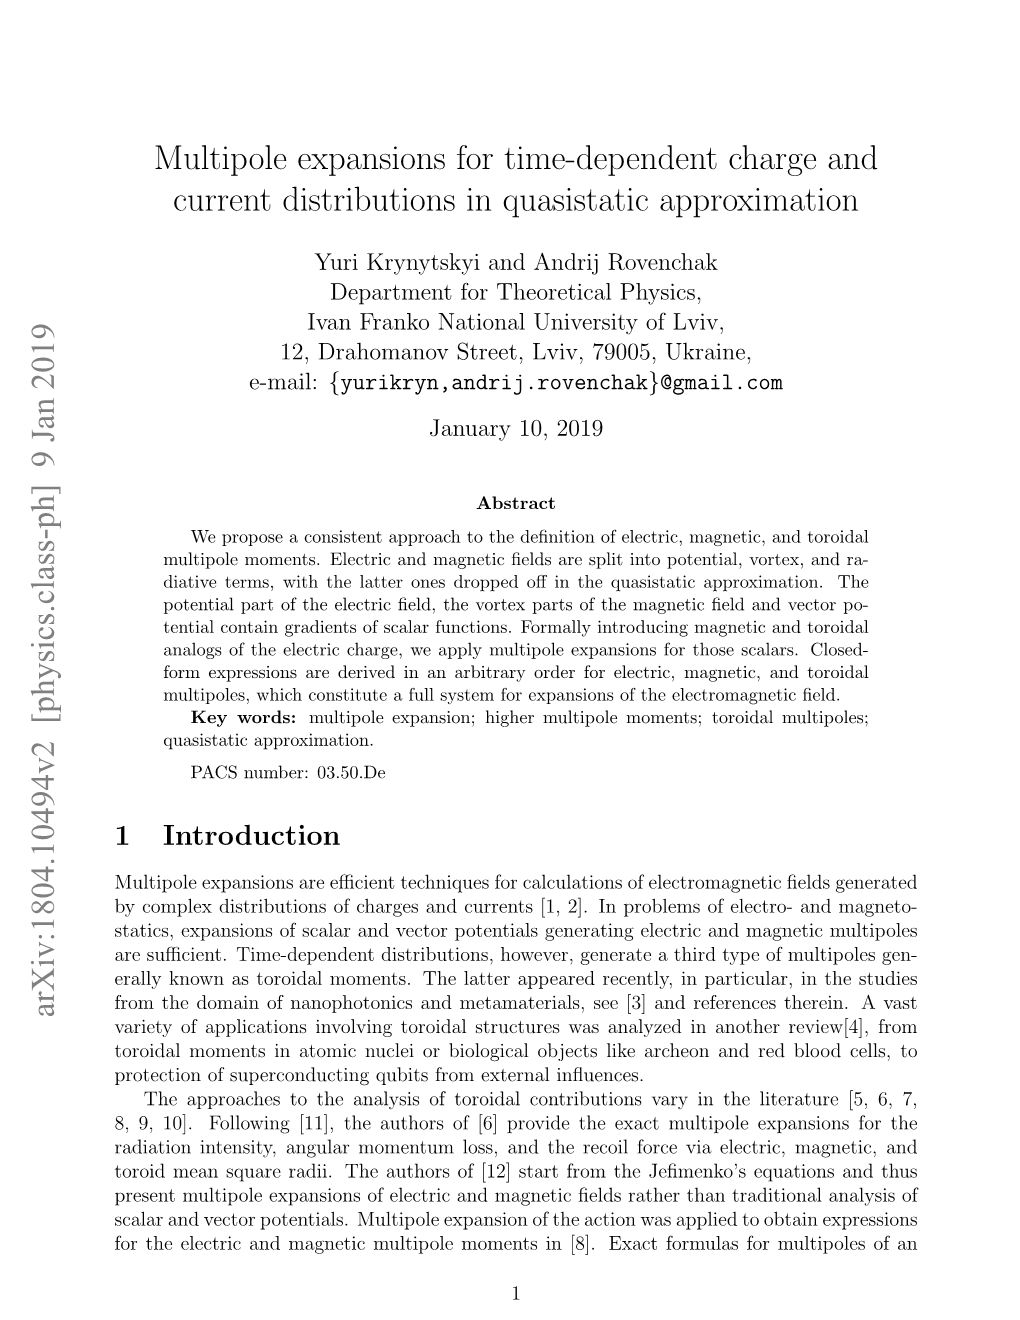 Multipole Expansions for Time-Dependent Charge and Current Distributions in Quasistatic Approximation